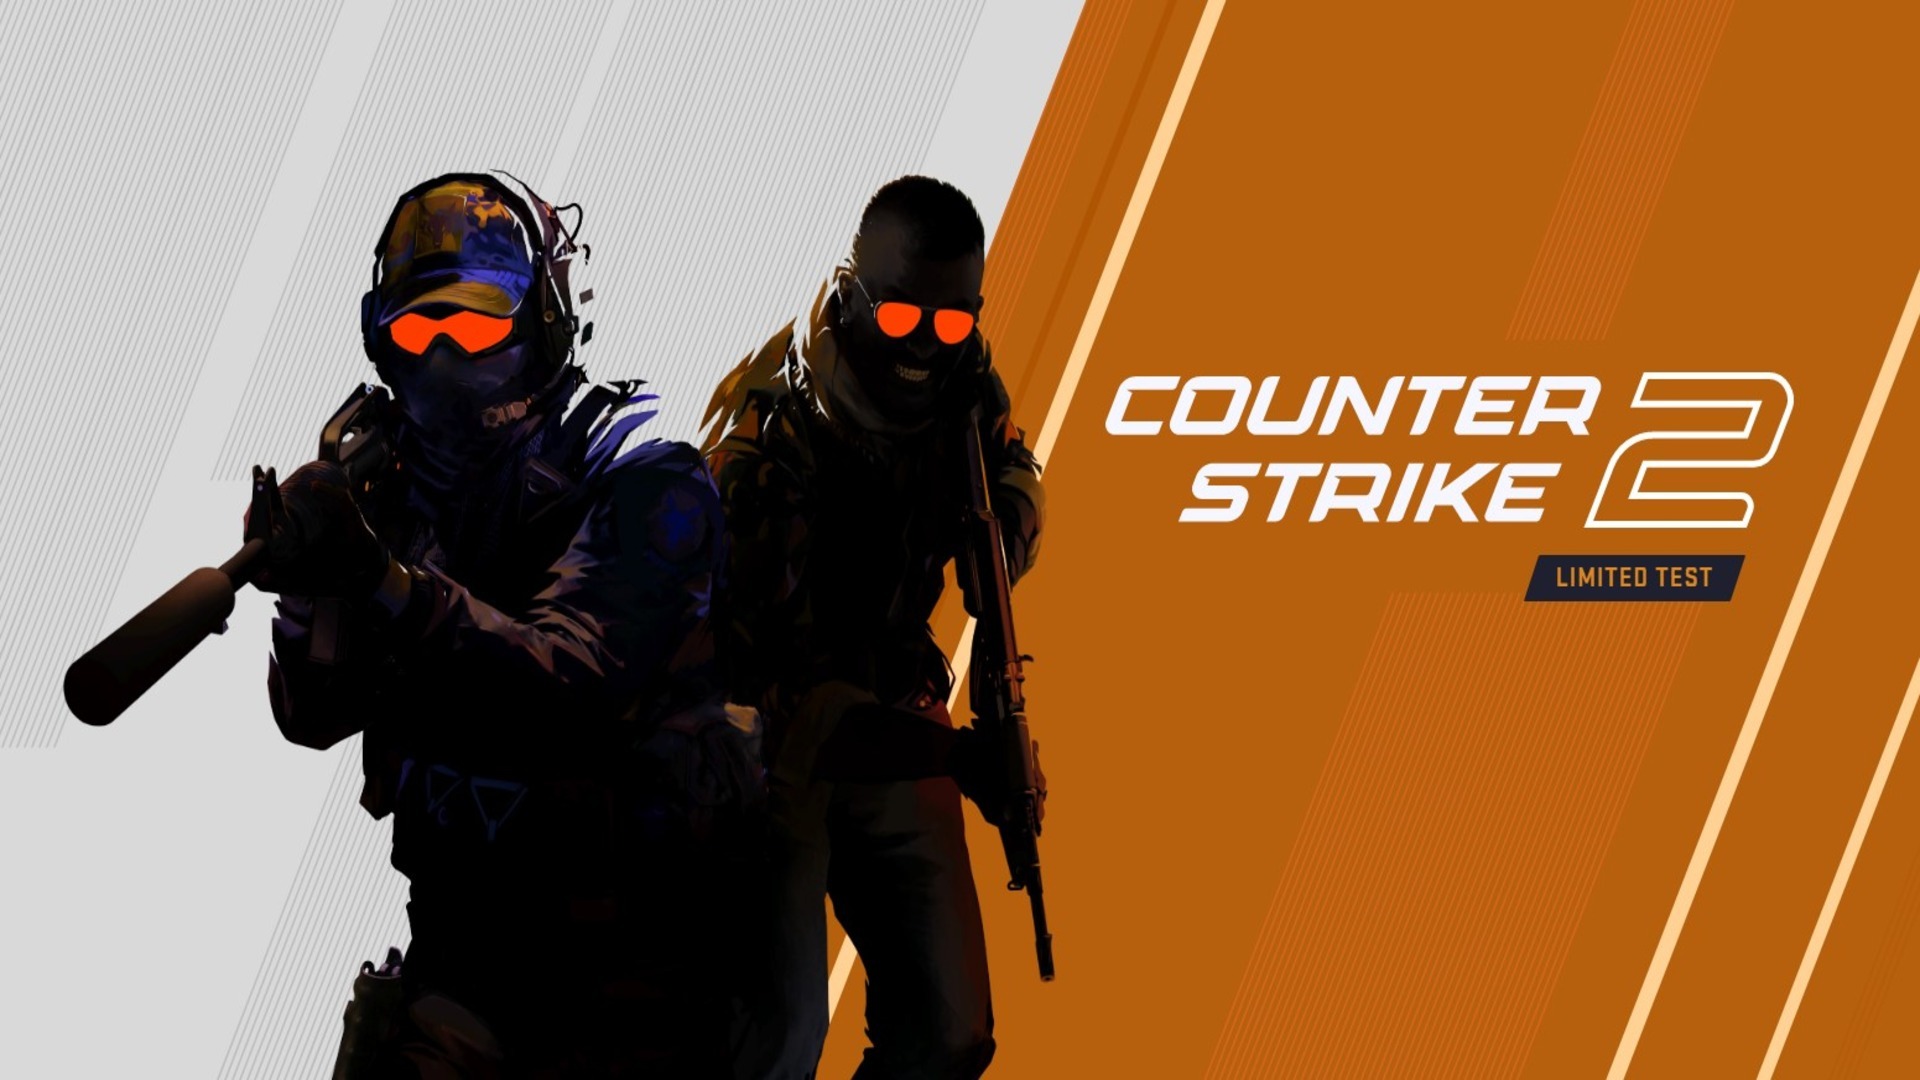 Official: Counter-Strike 2 confirmed and with a release this summer